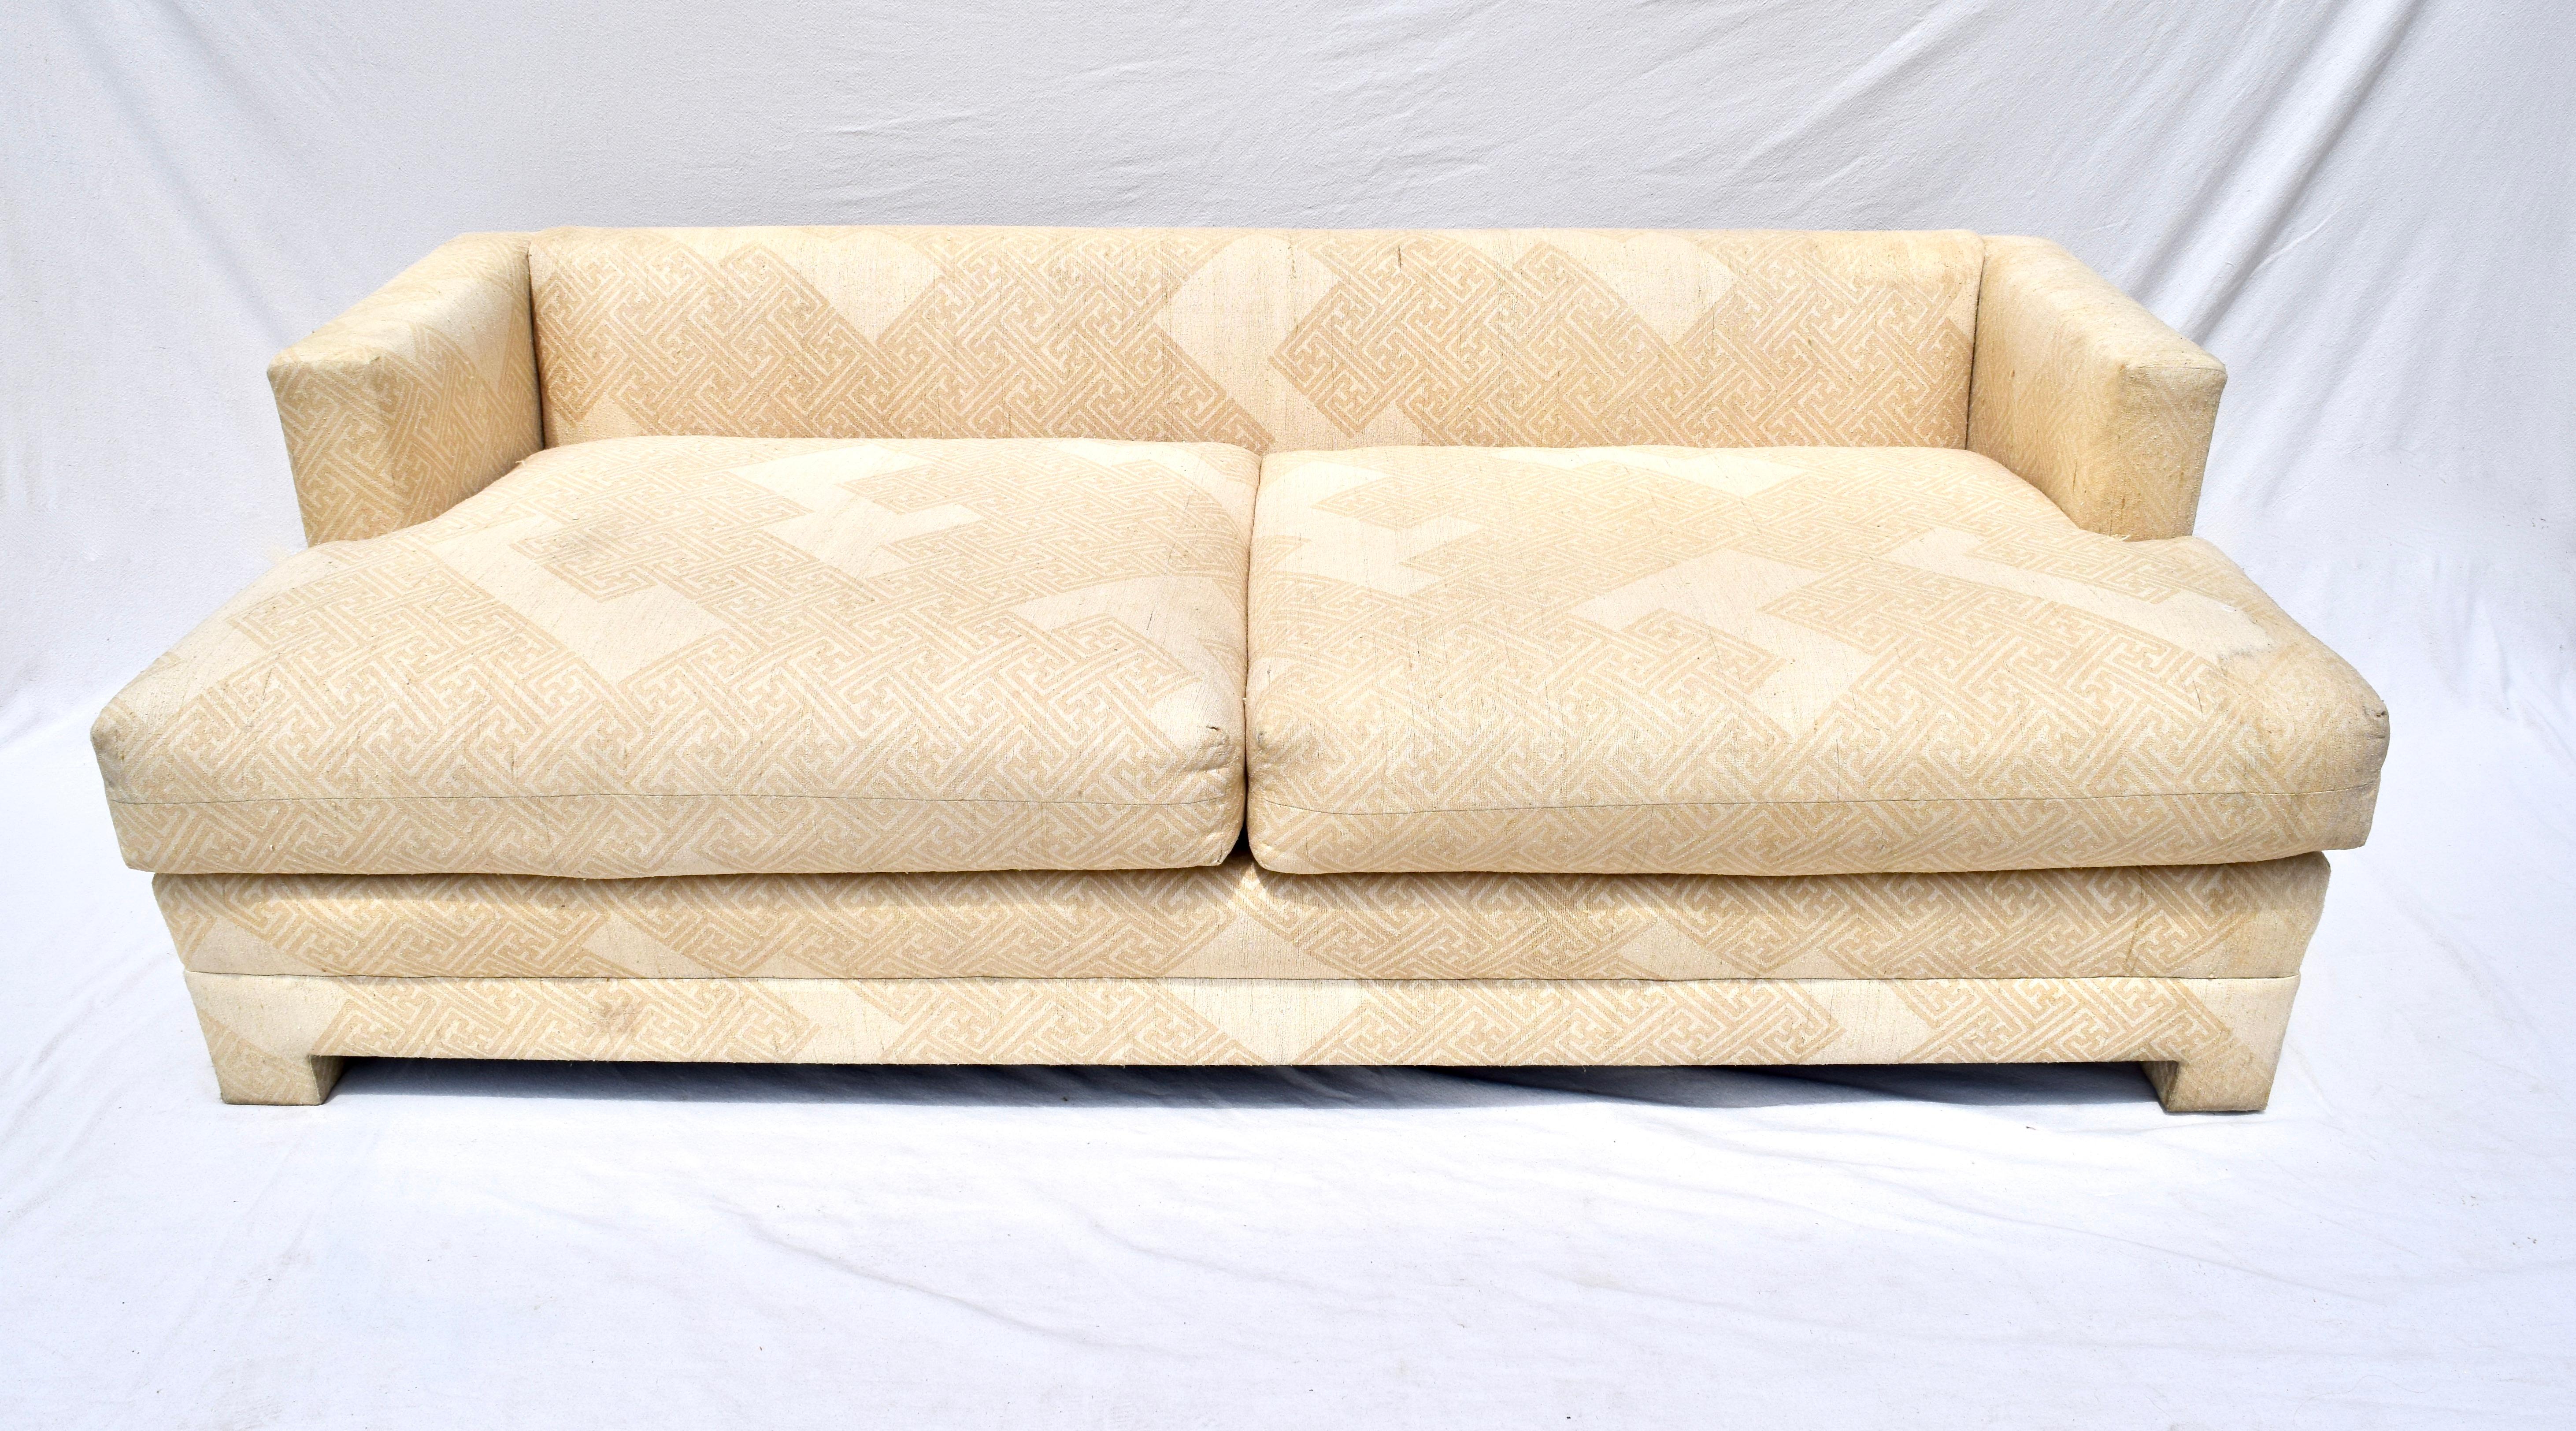 Billy Baldwin Tuxedo sofa custom commissioned by the original owner in the late 1970s. Hand block tribal print raw silk upholstery has water damage, professionally cleaned ready for your customization. New upholstery recommended. Exceptionally high